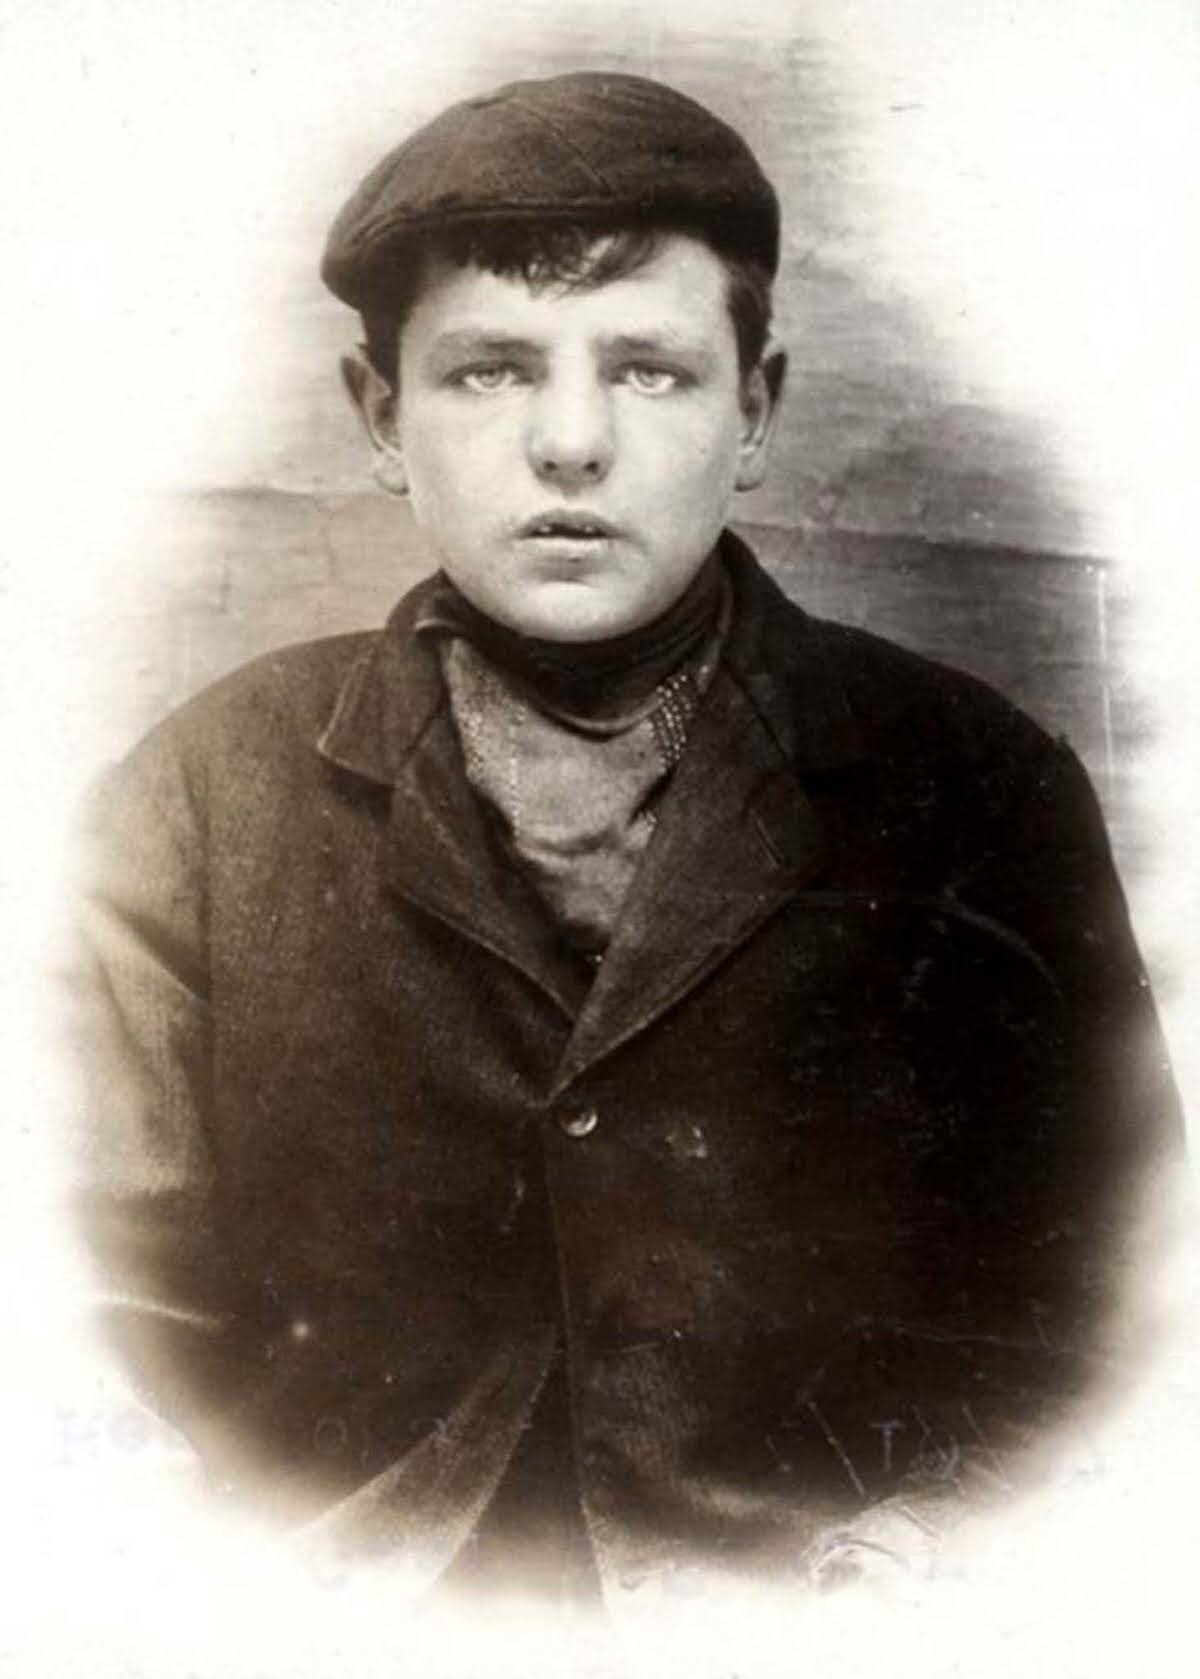 George Taylor, 17, arrested on suspicion of planning to commit a felony, 1907.